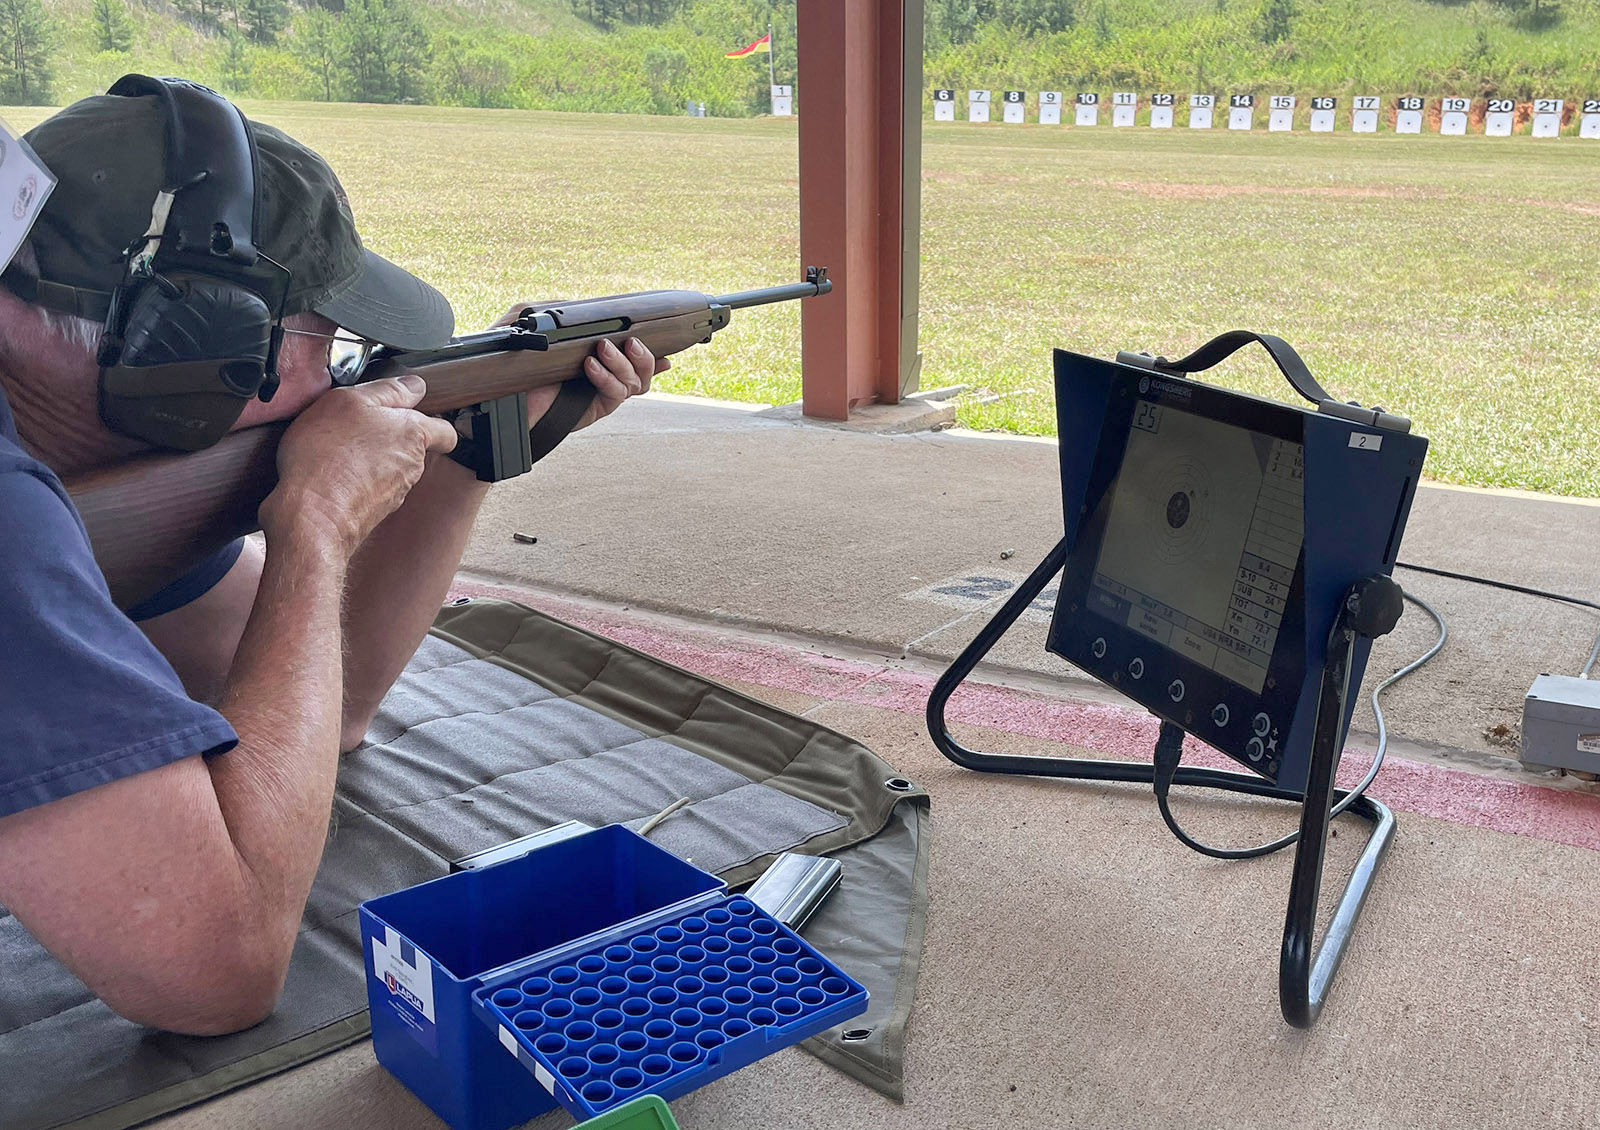 Shooting my rebuilt 1943 Saginaw SG M1 Carbine at the carbine match held on the 100 yd range.  This was my first carbine match, and several newbie errors left me in 30th place out of 46 competitors.